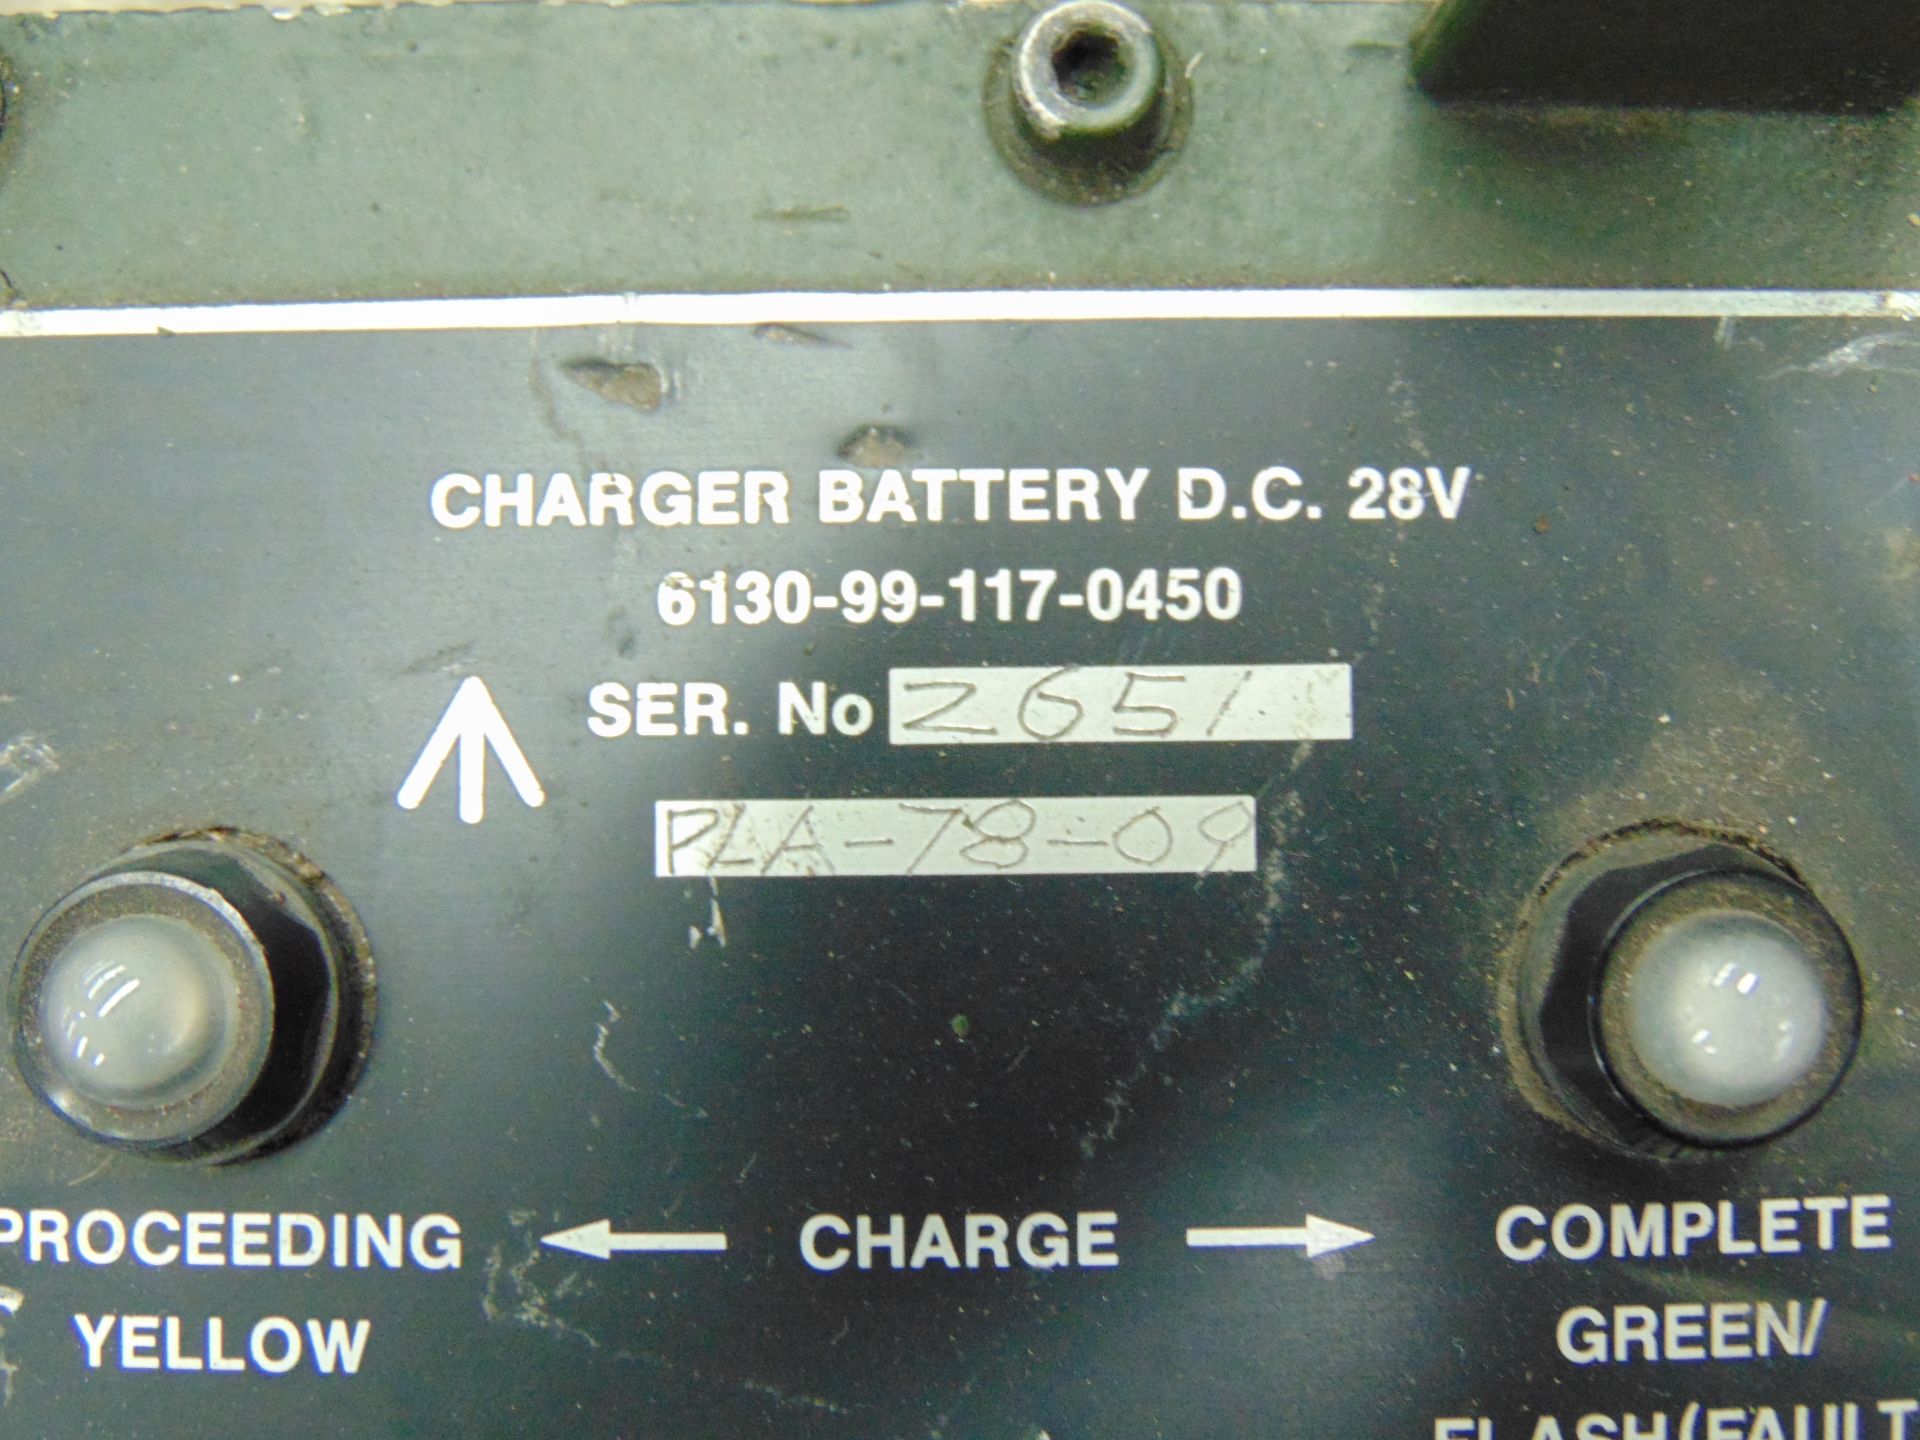 6 x Clansman D.C. 28V Battery Chargers - Image 4 of 4